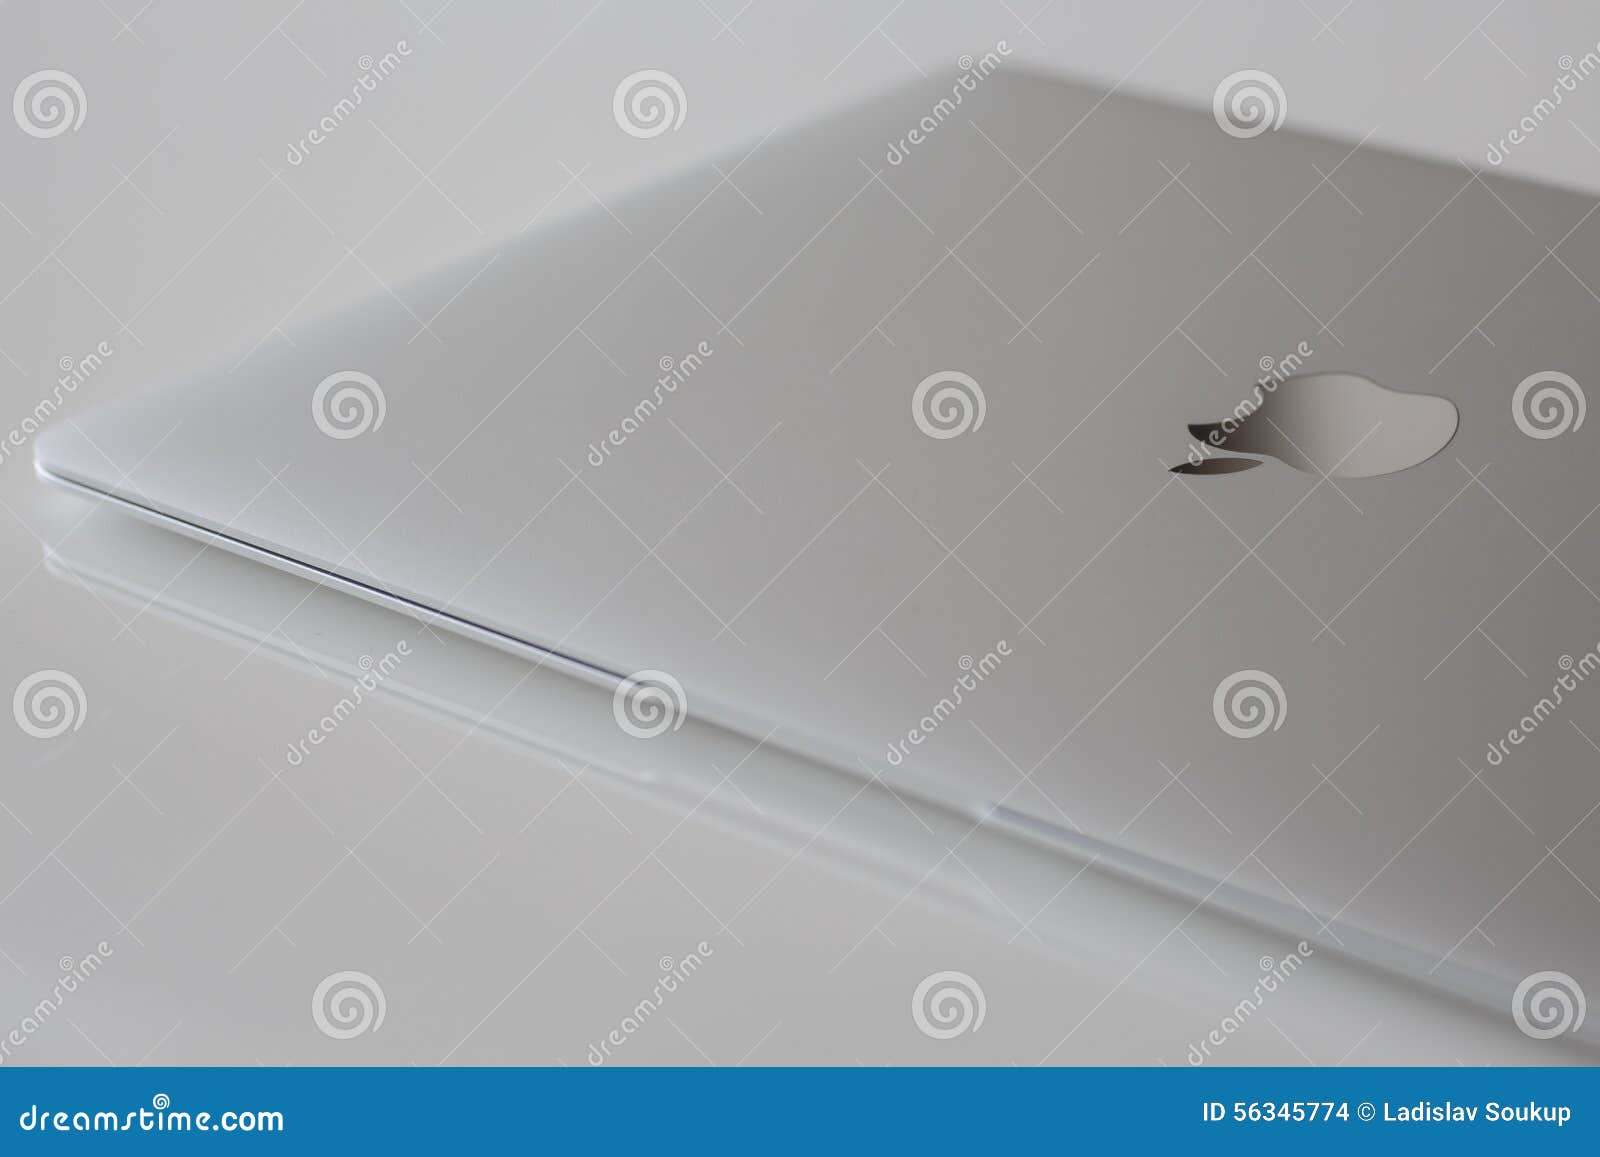 Closed MacBook 12 Silver 1st Gen Editorial Stock Image - Image of ...